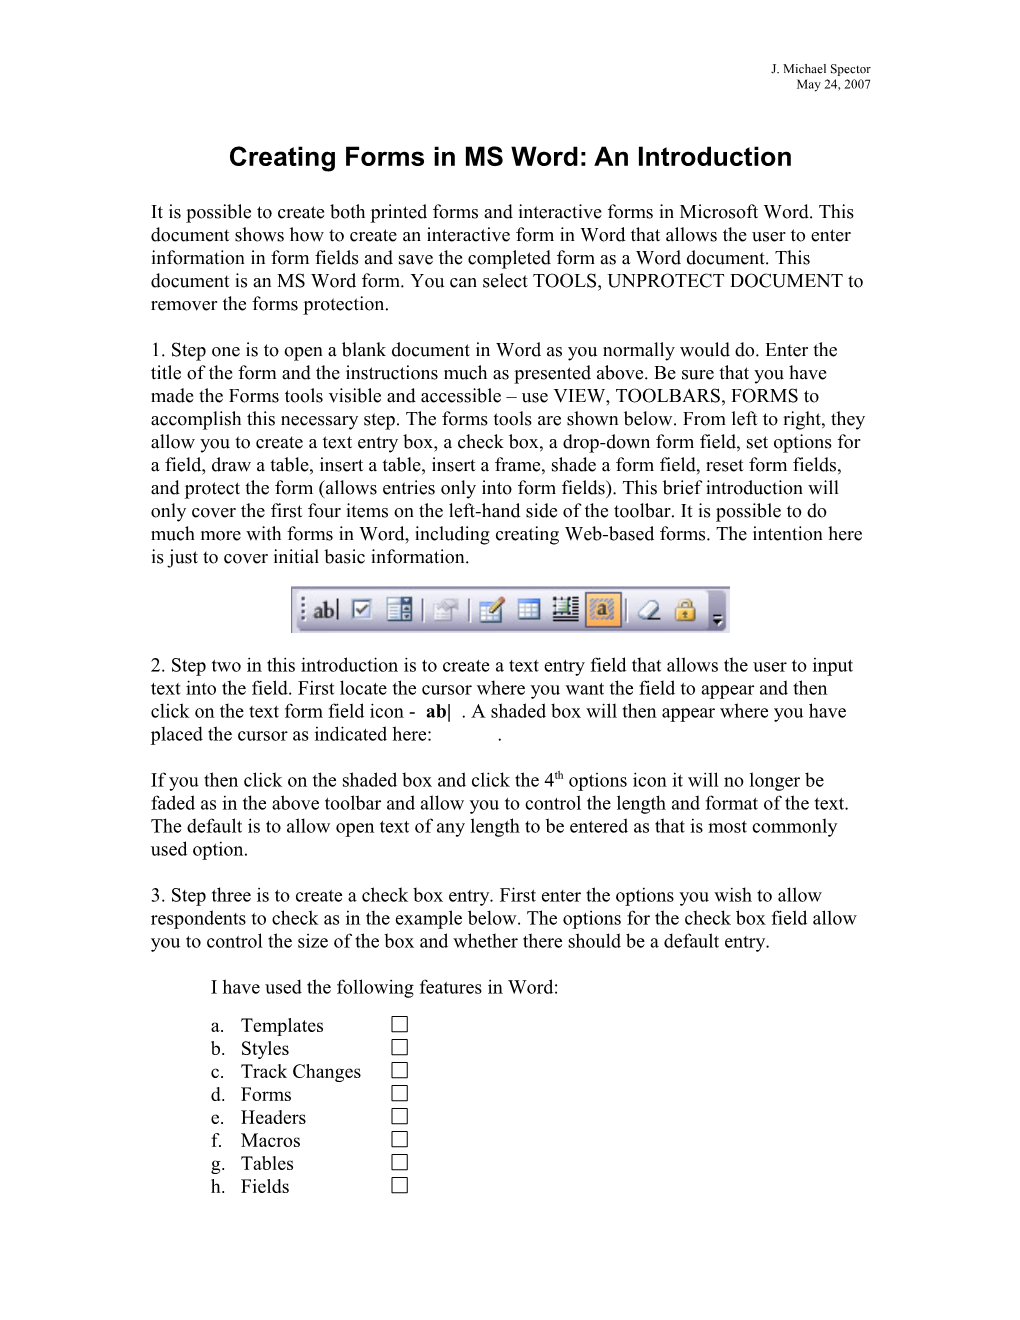 Creating Forms in MS Word: an Introduction